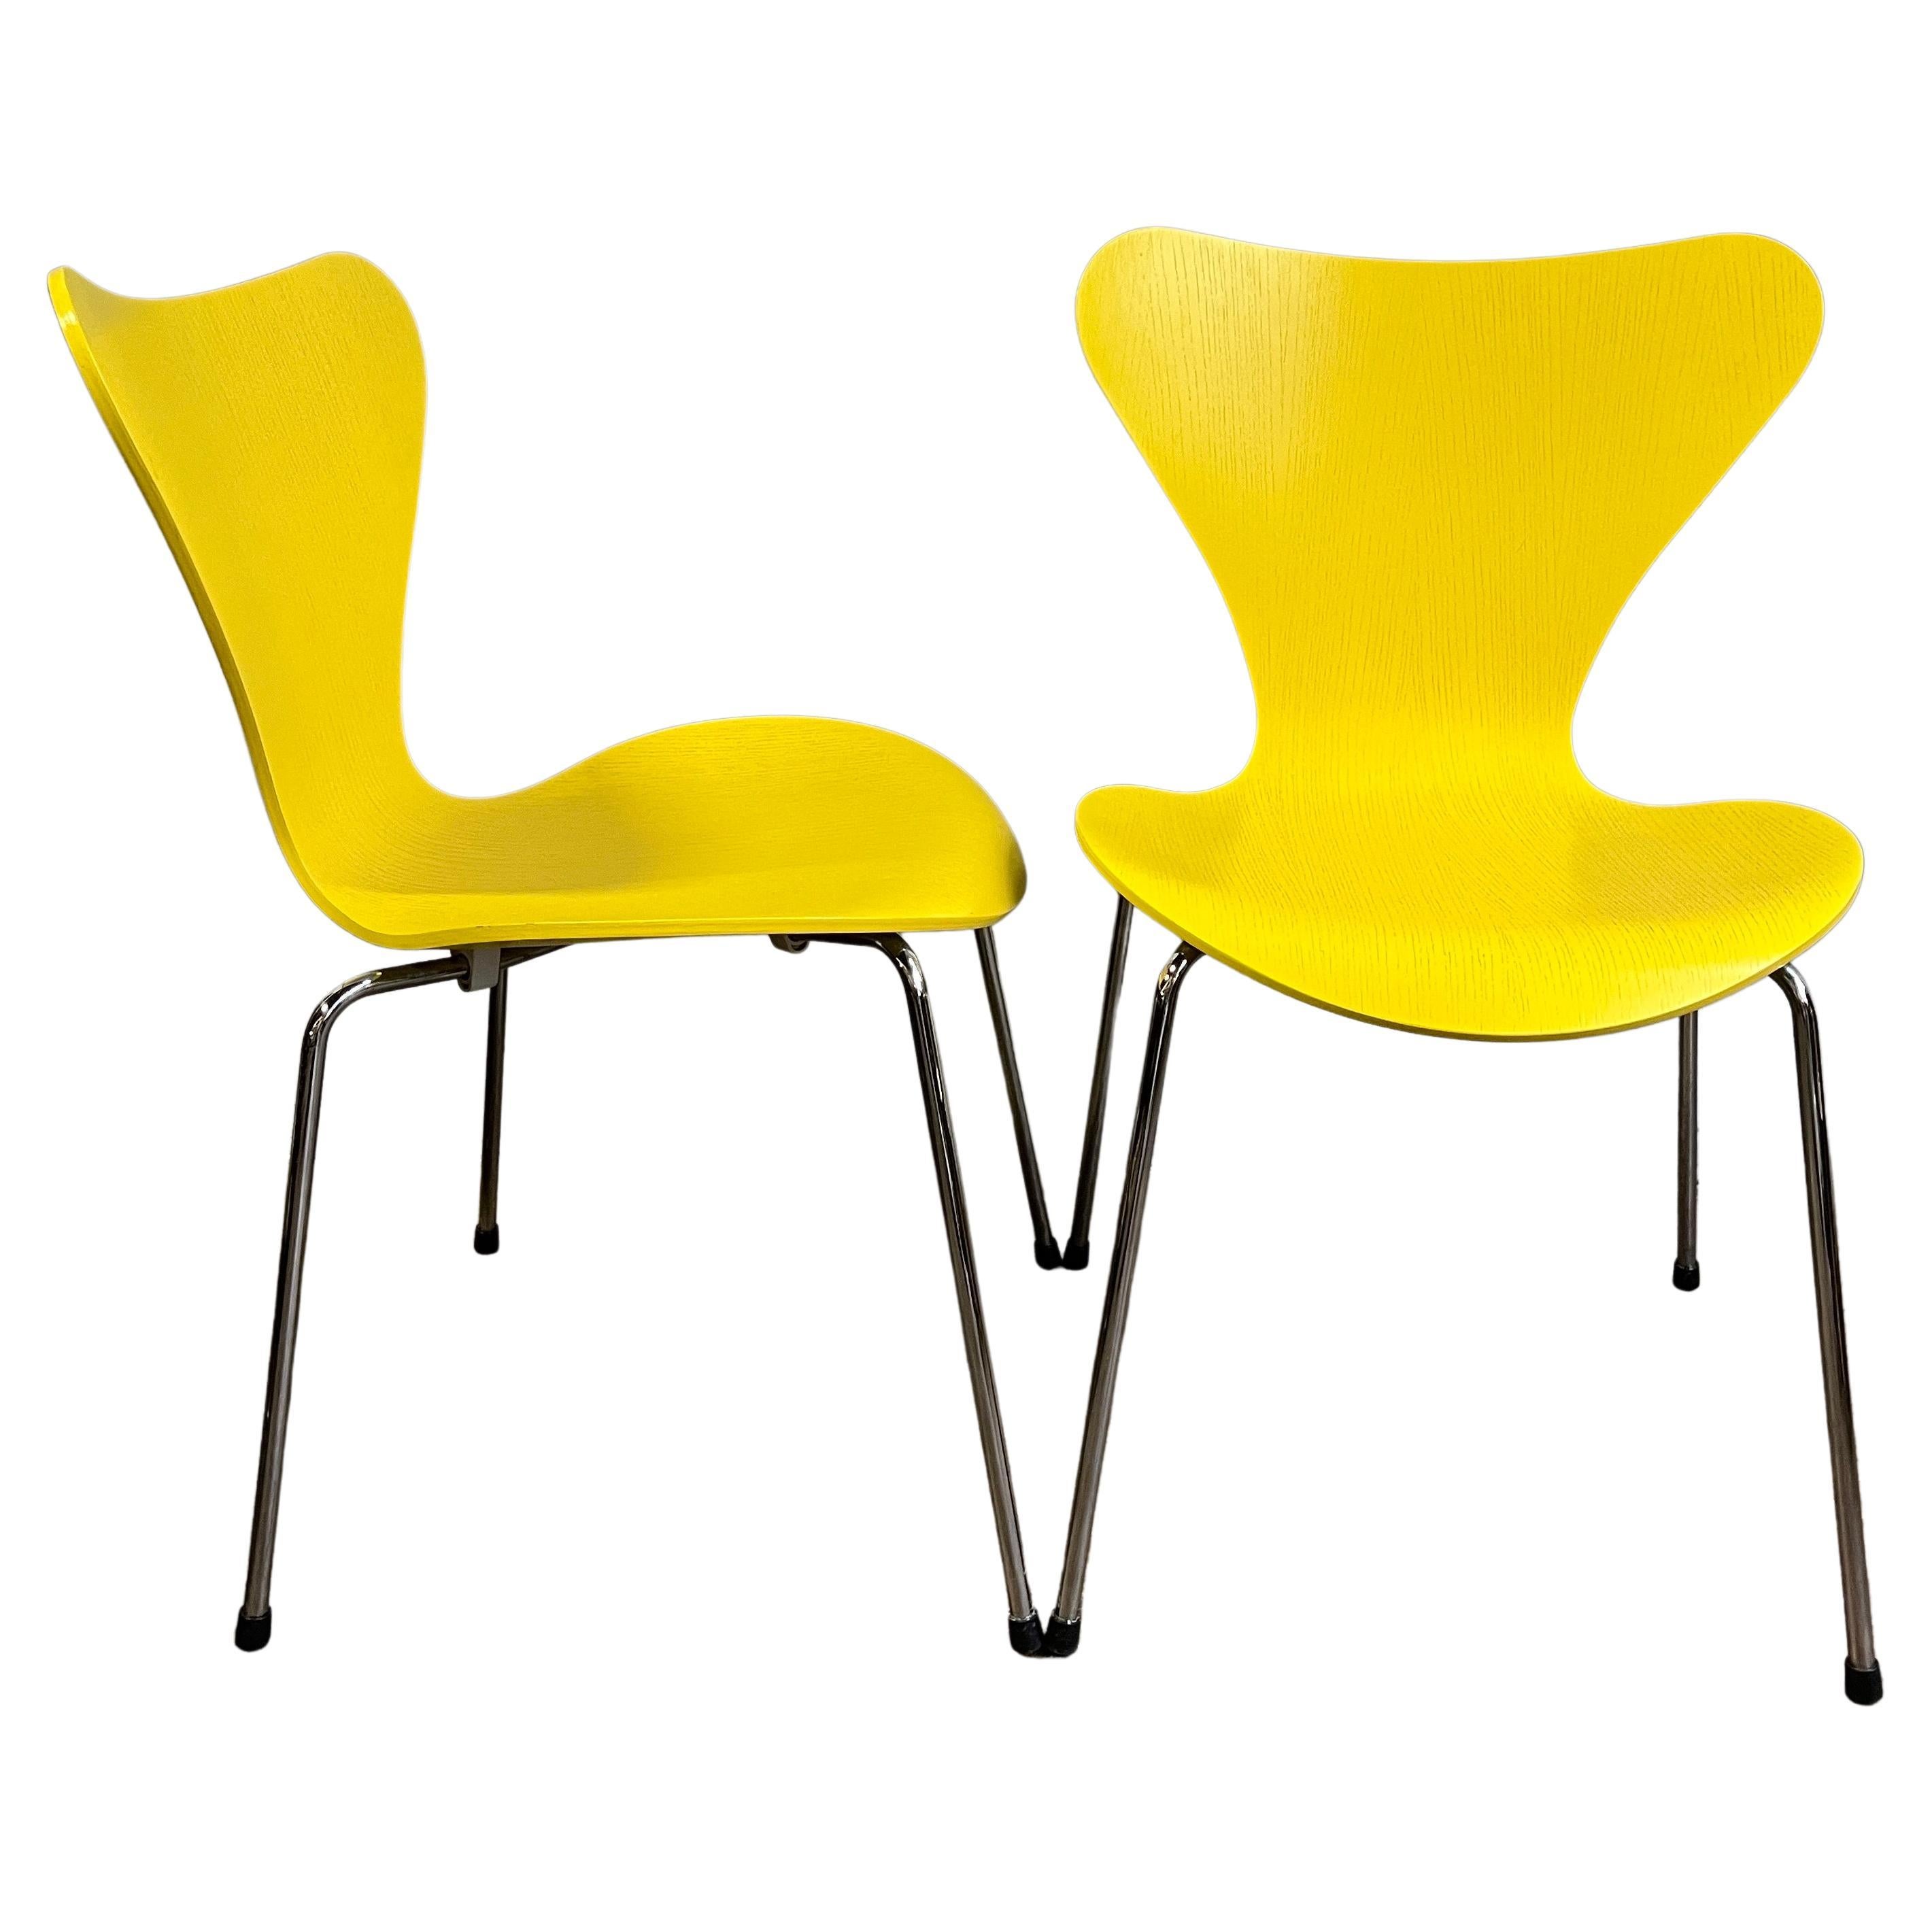 Midcentury Arne Jacobsen Series 7 Chairs Sunny Yellow For Sale 1